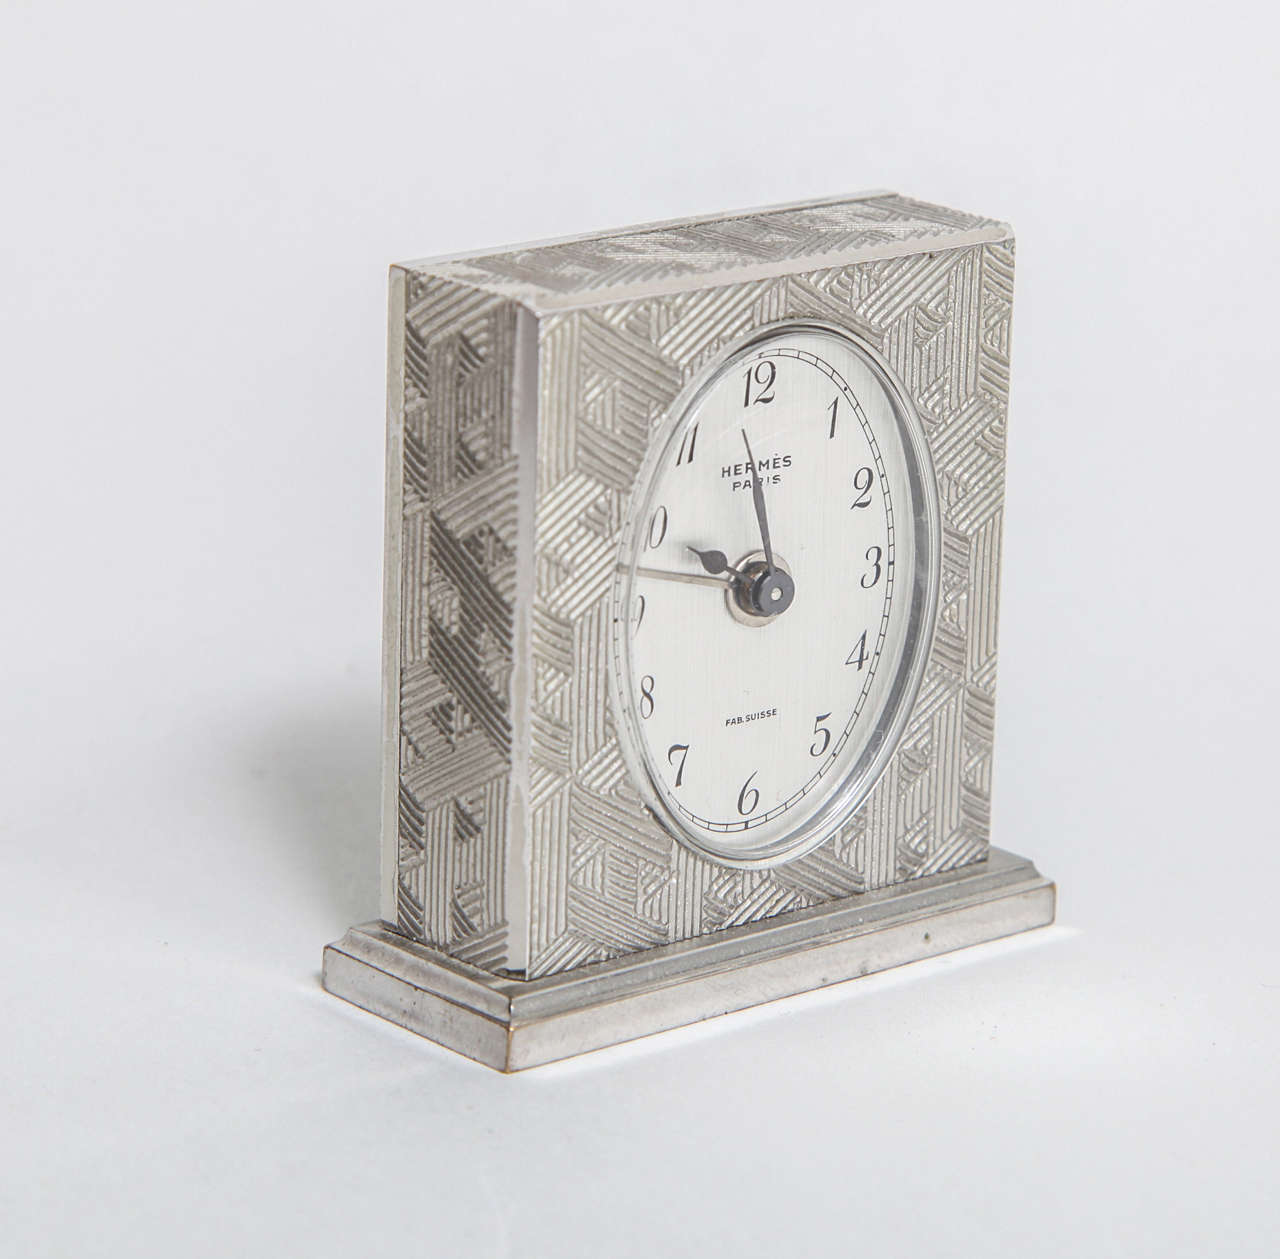 A fabulous Art Deco Hermes travel alarm clock with a geometric pattern on plated bronze body. This clock is in its original velvet lined gate front fitted suede box which has the Hermes logo and Parisian address. The movement is made in Switzerland